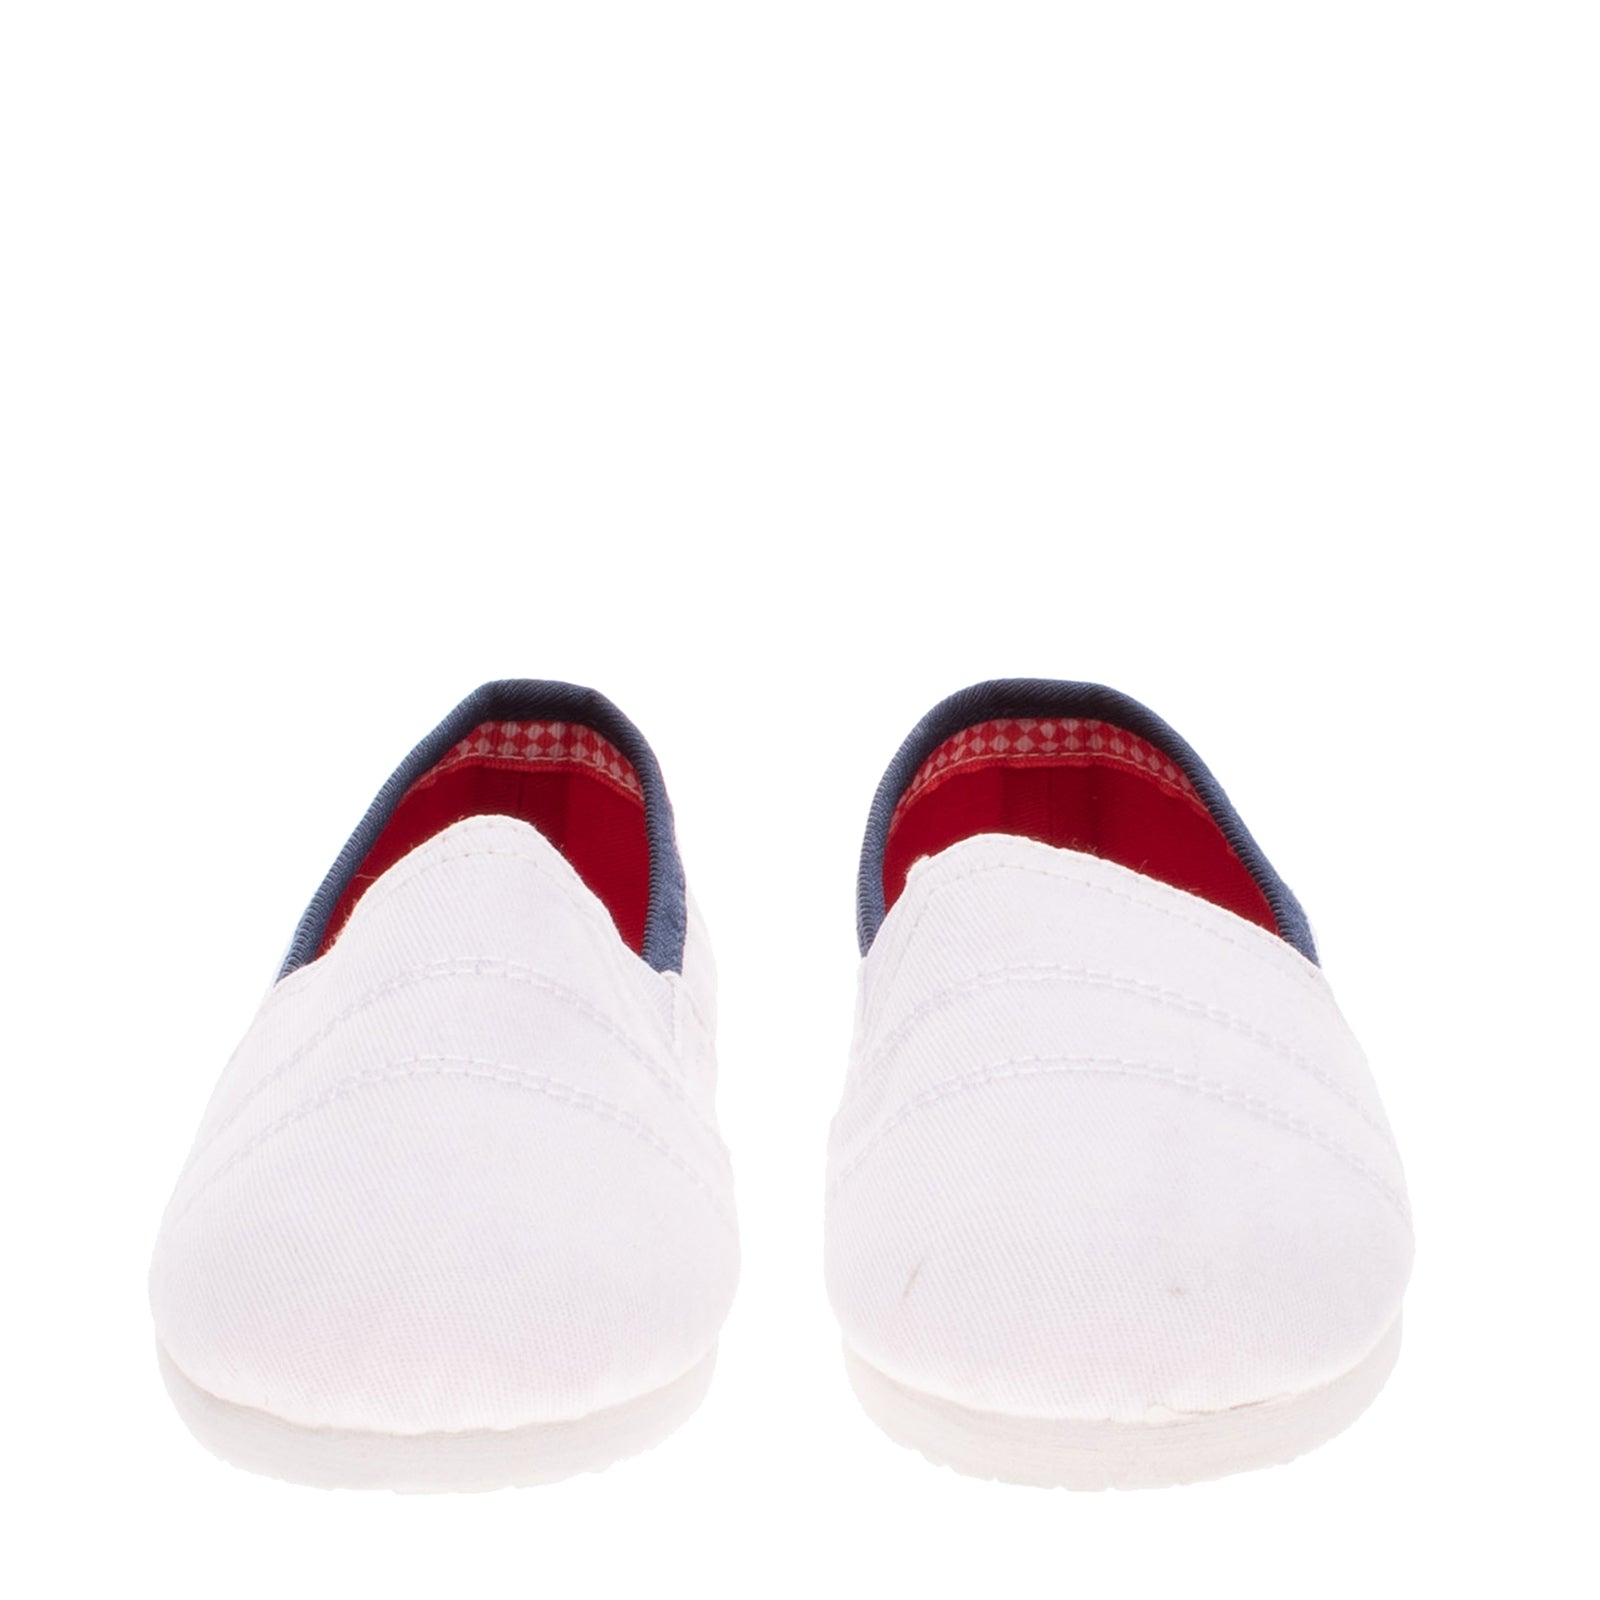 MTNG Plimsoll Flat Shoes EU 33 UK 14 US 1.5 Elasticated Inserts Stitched Slip On gallery main photo